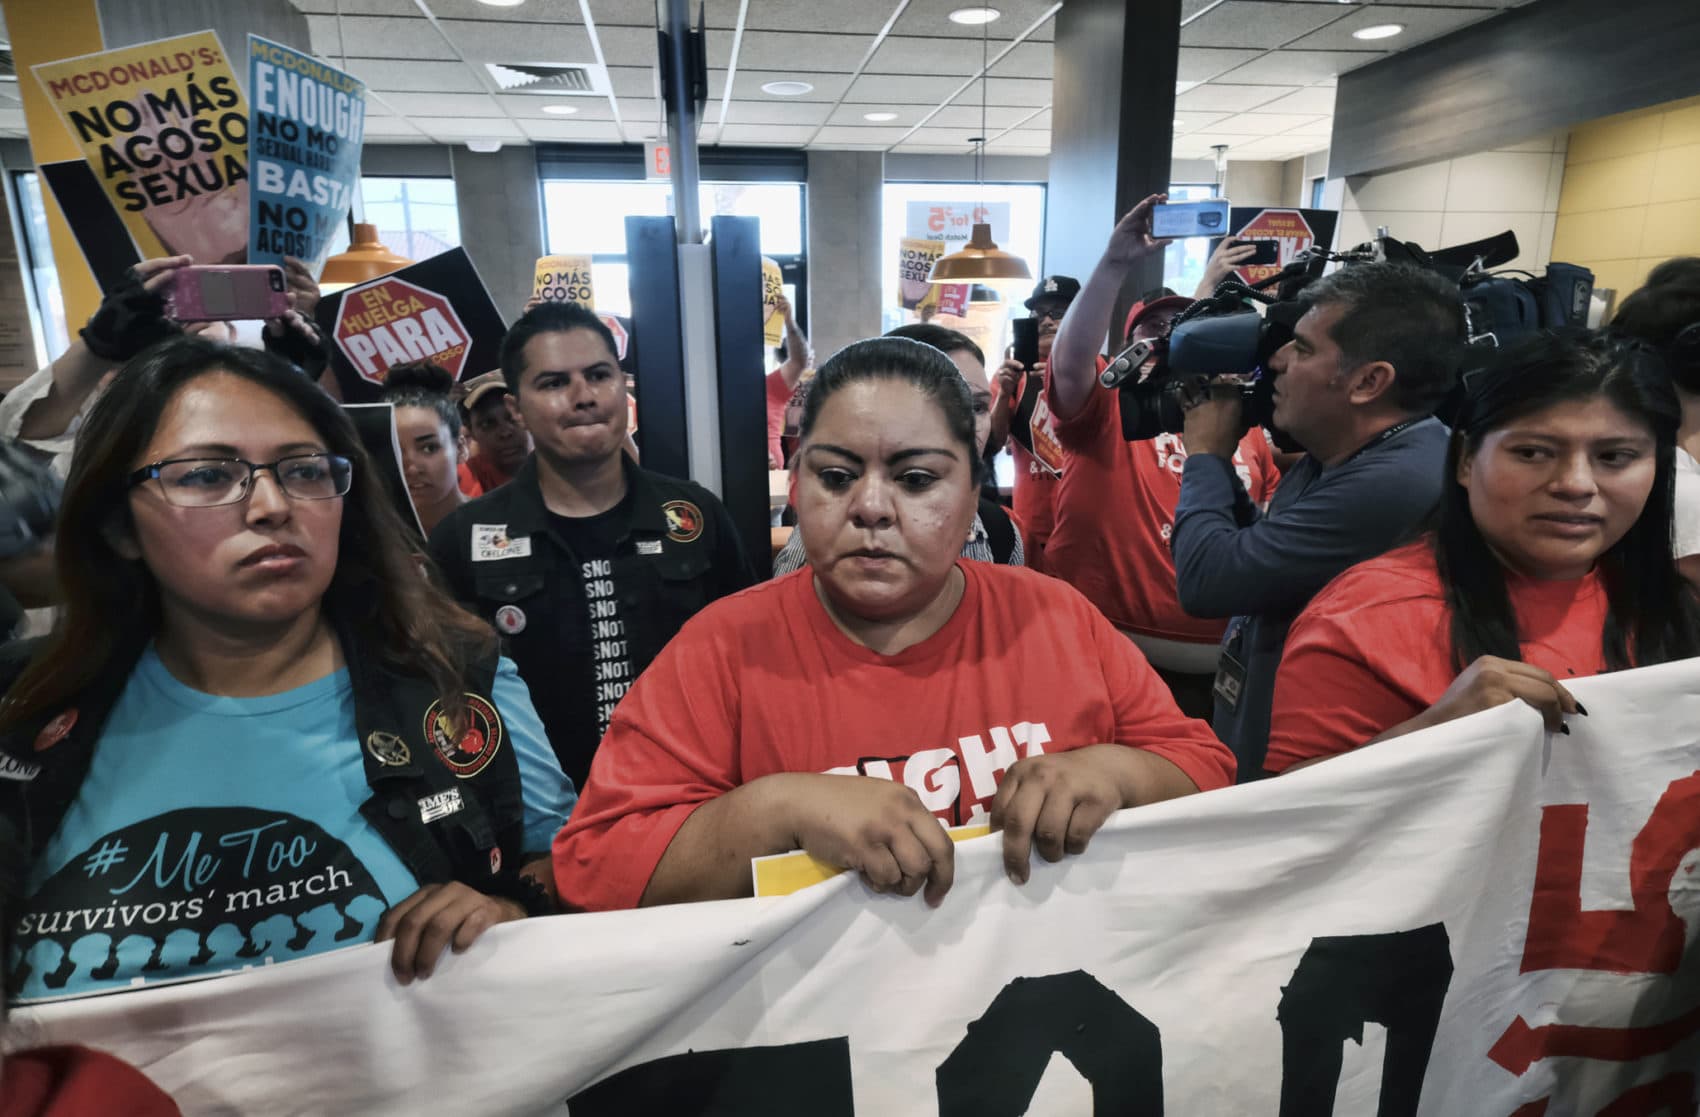 McDonald's workers protest inside of a McDonalds resturant in south Los Angeles on Tuesday, Sept. 18, 2018 (Richard Vogel/AP)